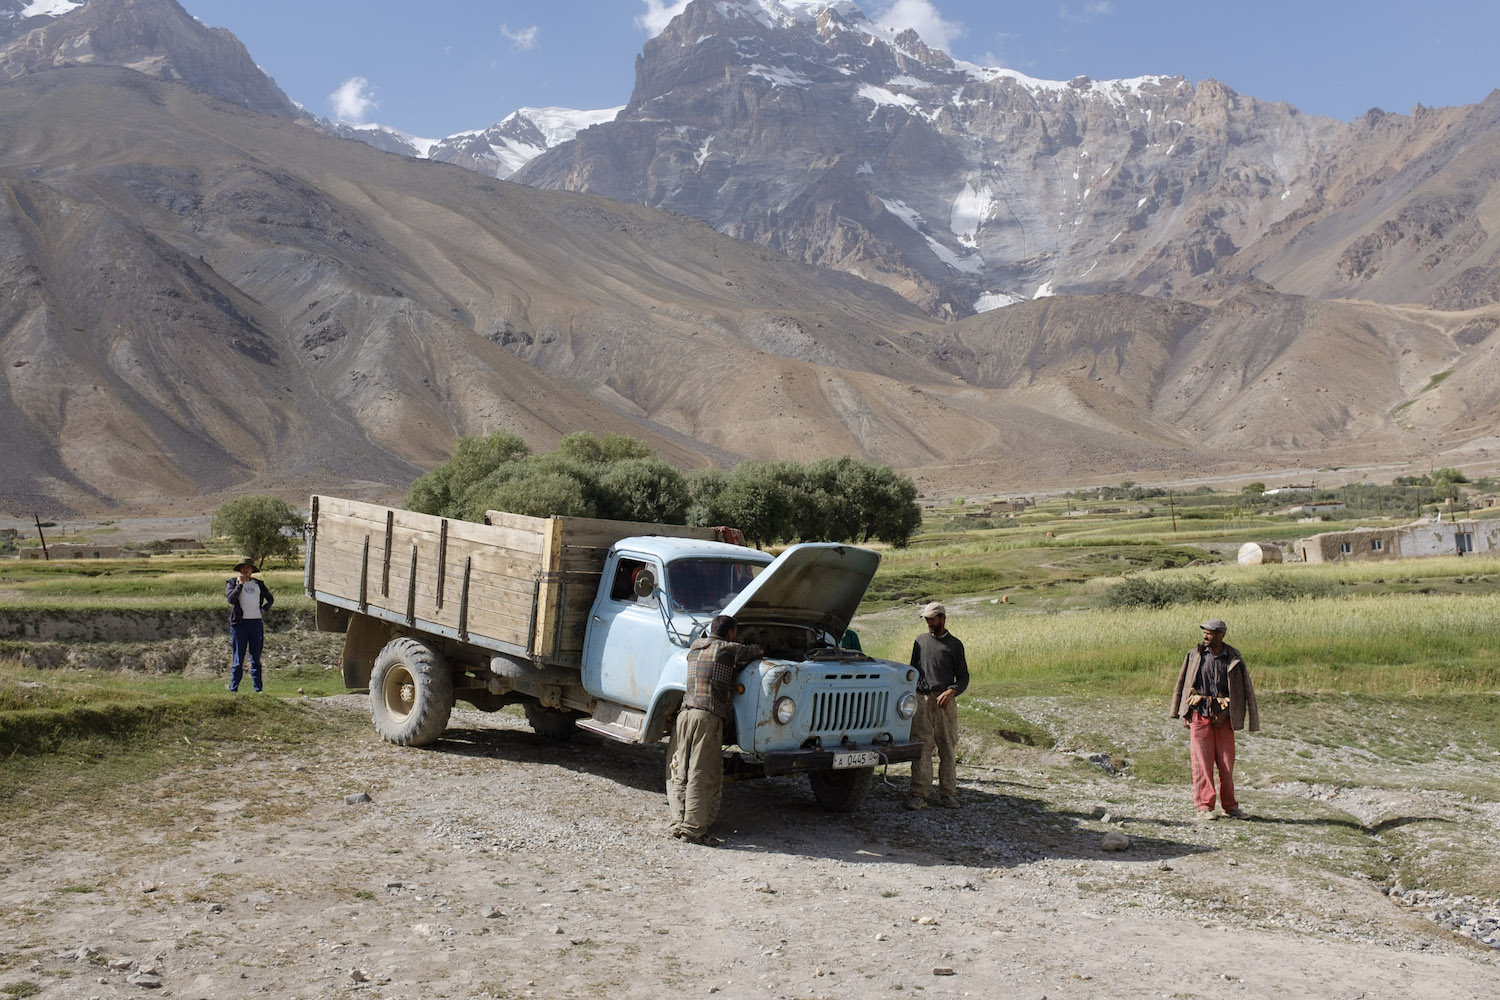 Men gather around a truck. Many vehicles fail to make the arduous journey through the Pamirs